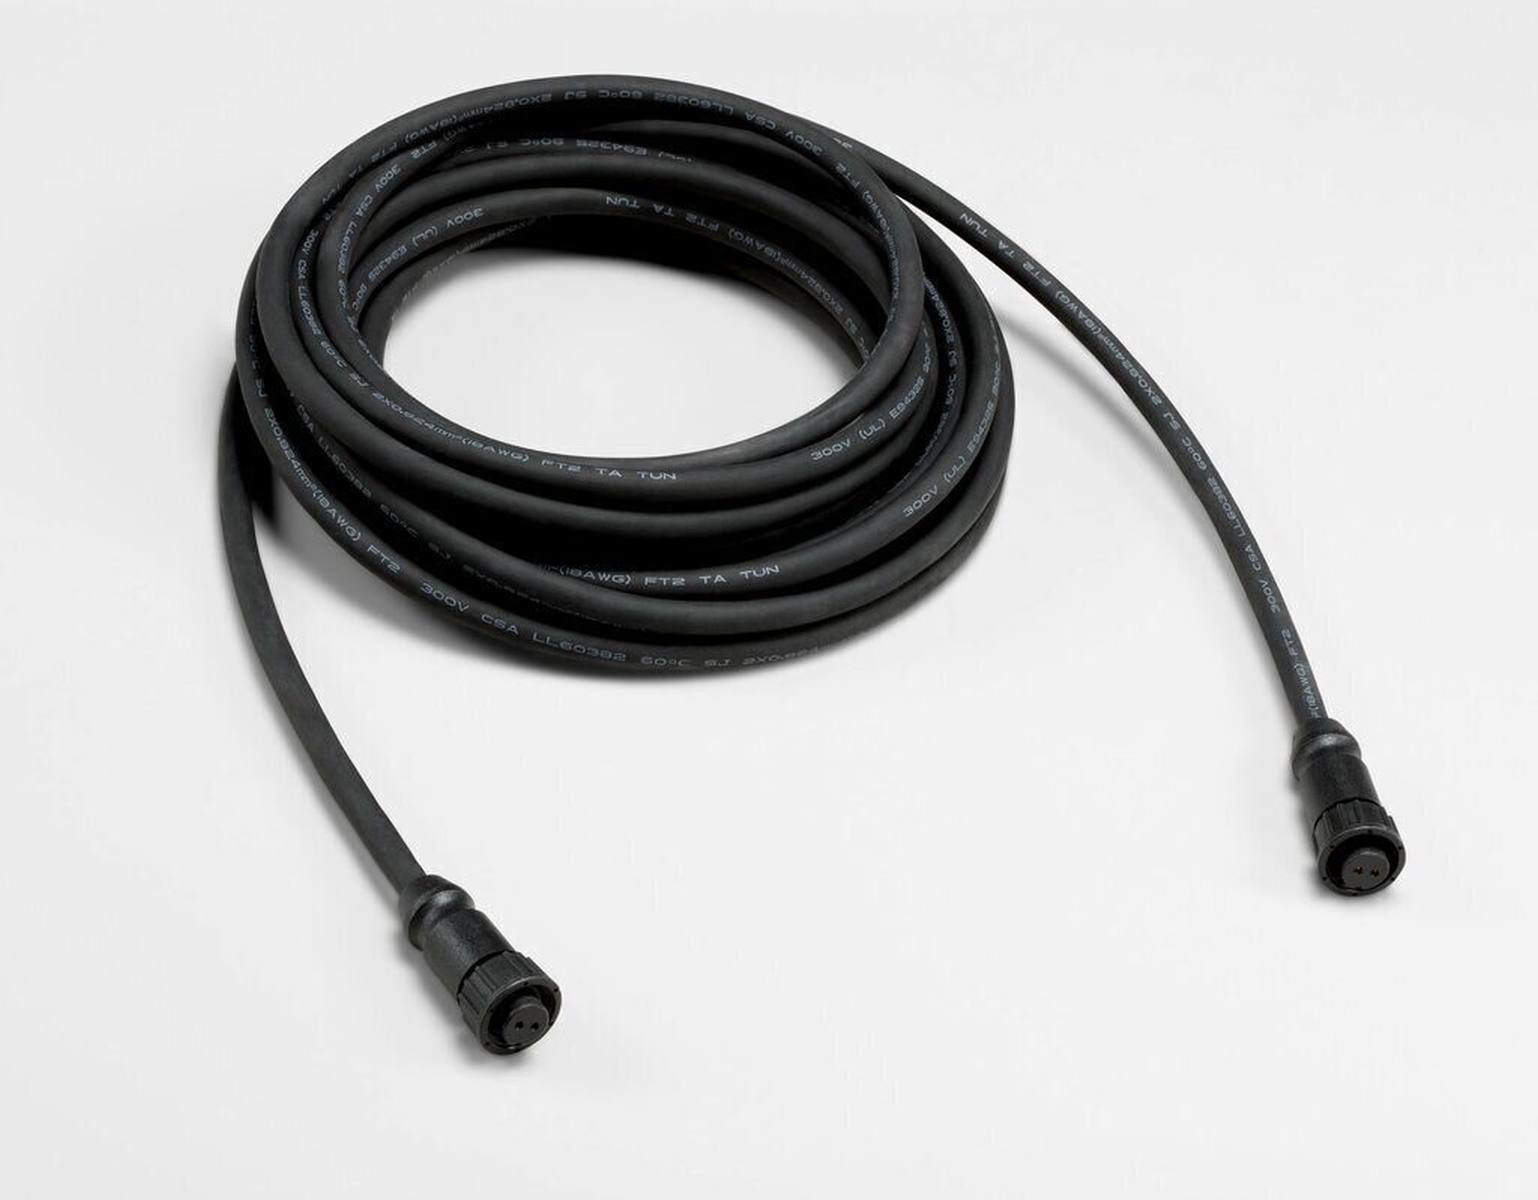 3M connecting cable for power supply unit and one-hand random orbital sander, 3.6 m PN28434